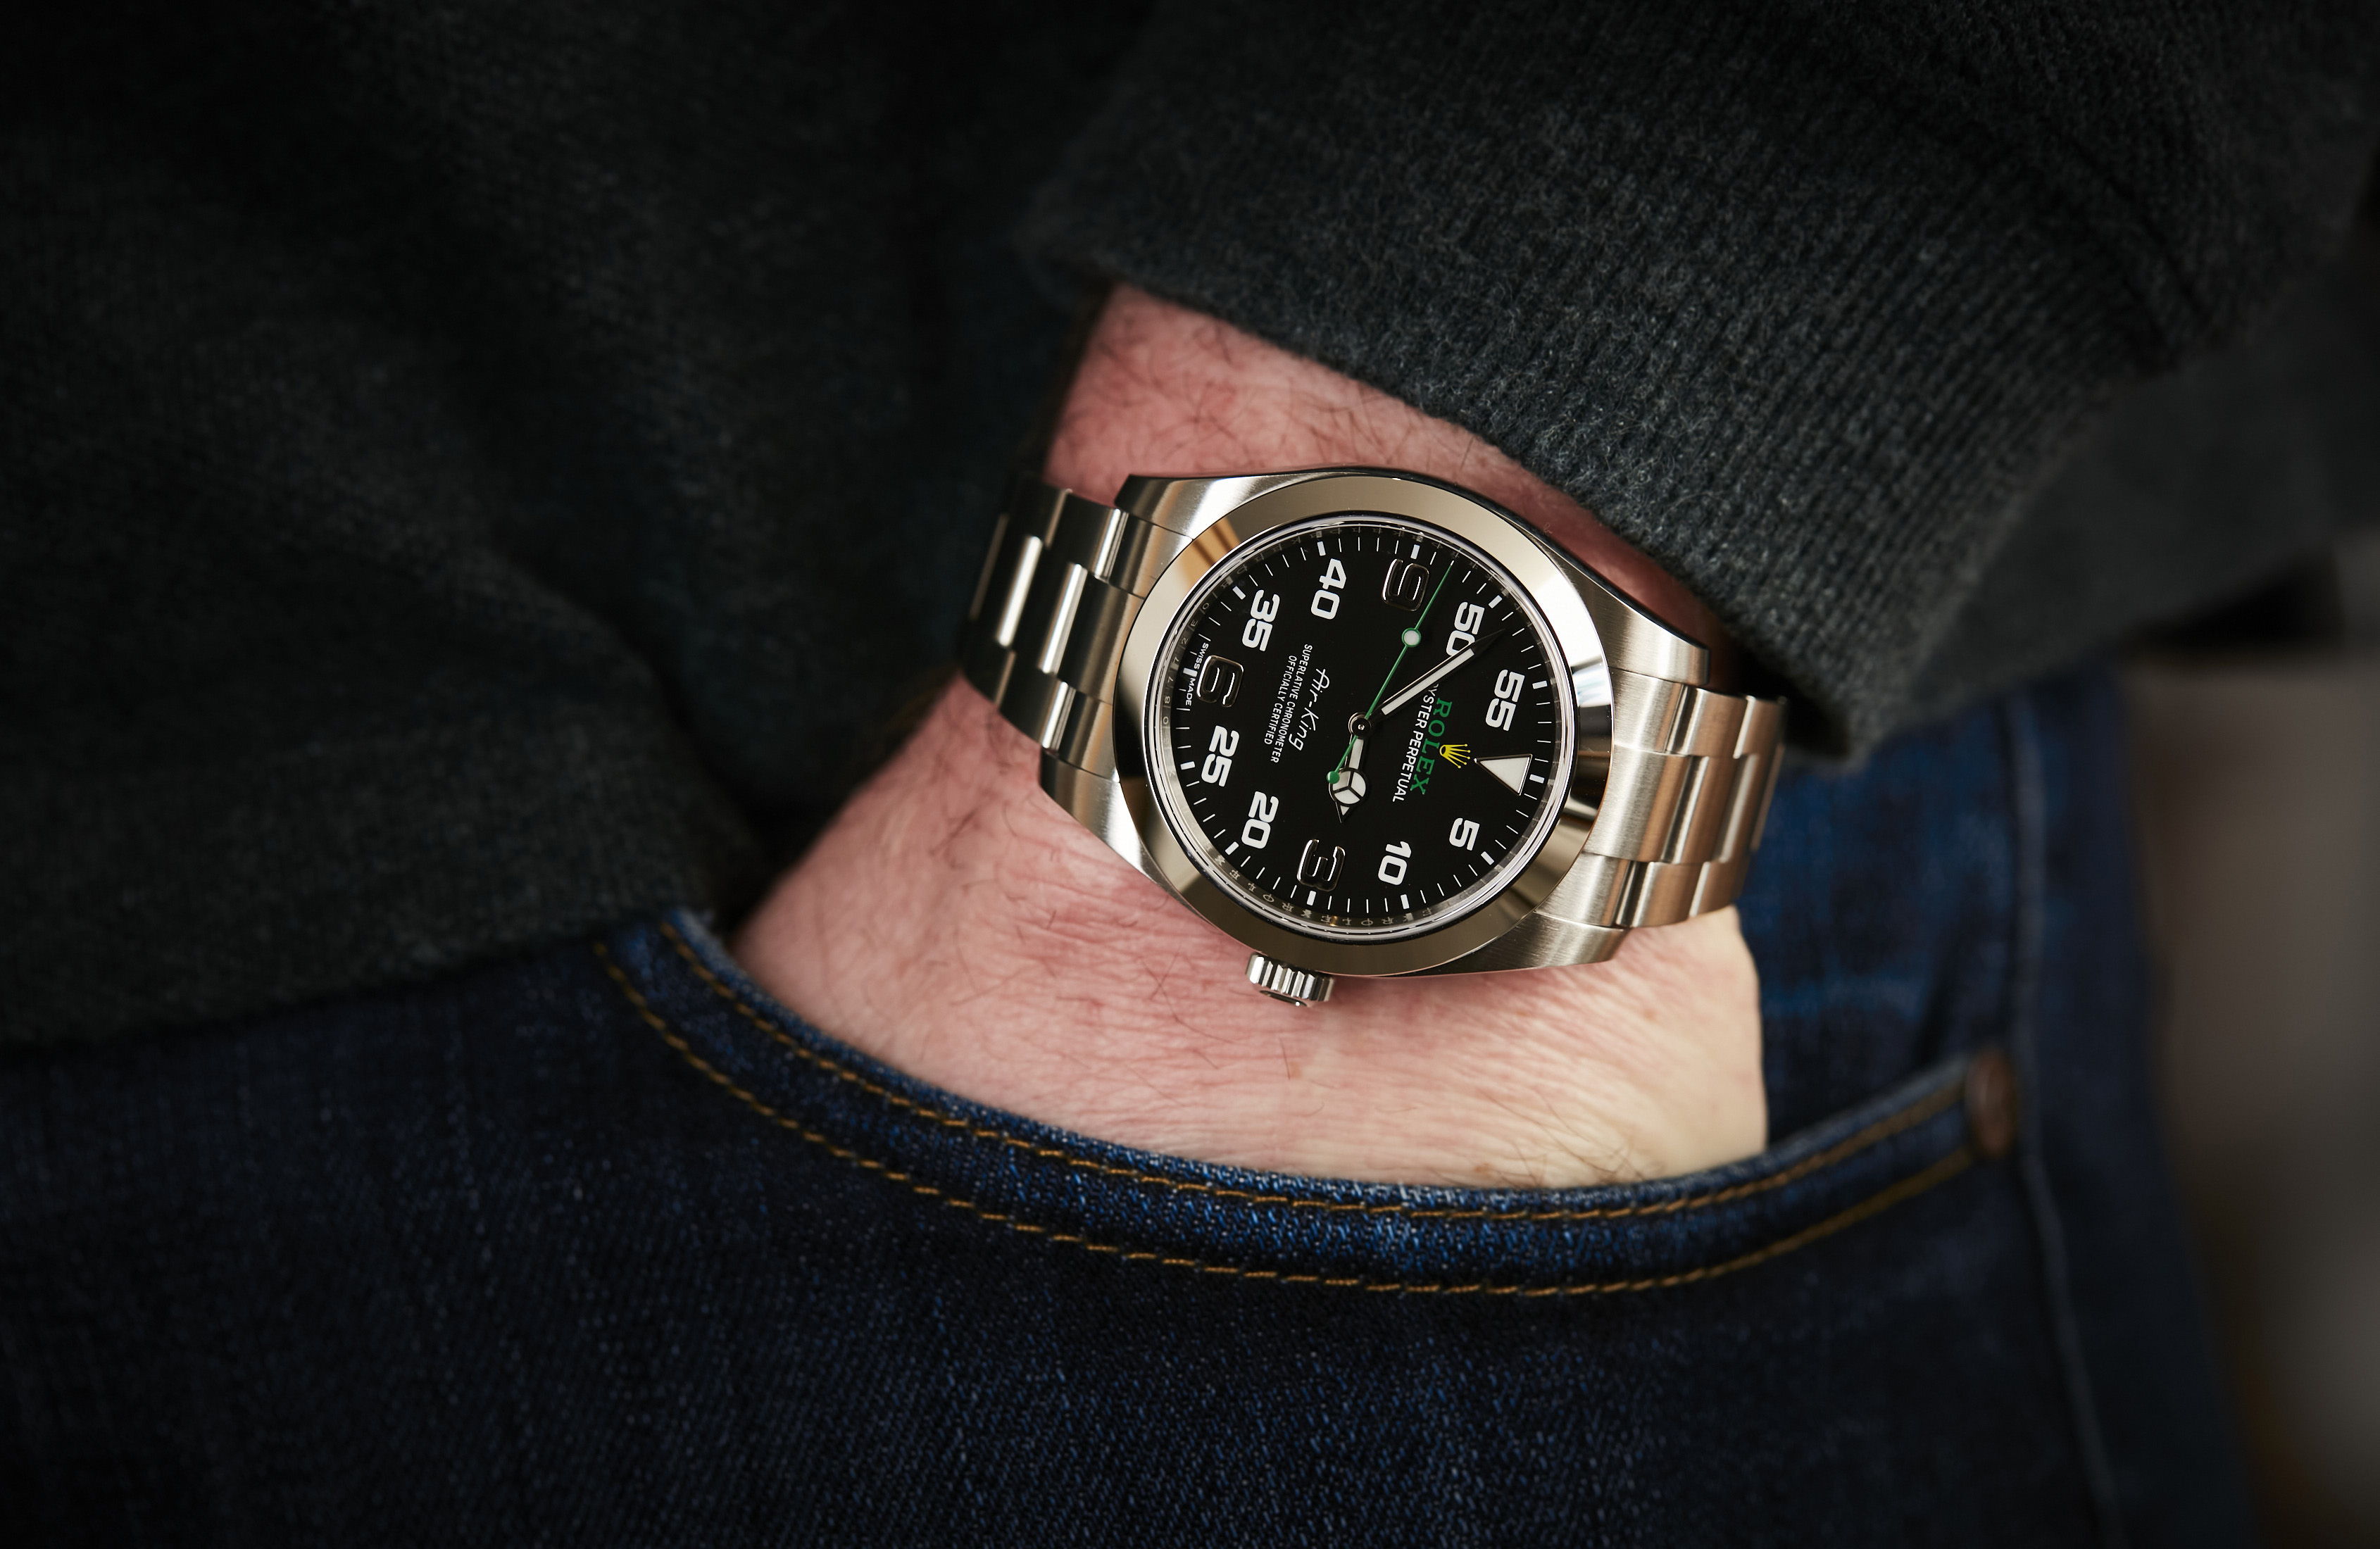 Rolex Air-King Ref 116900 review 2020